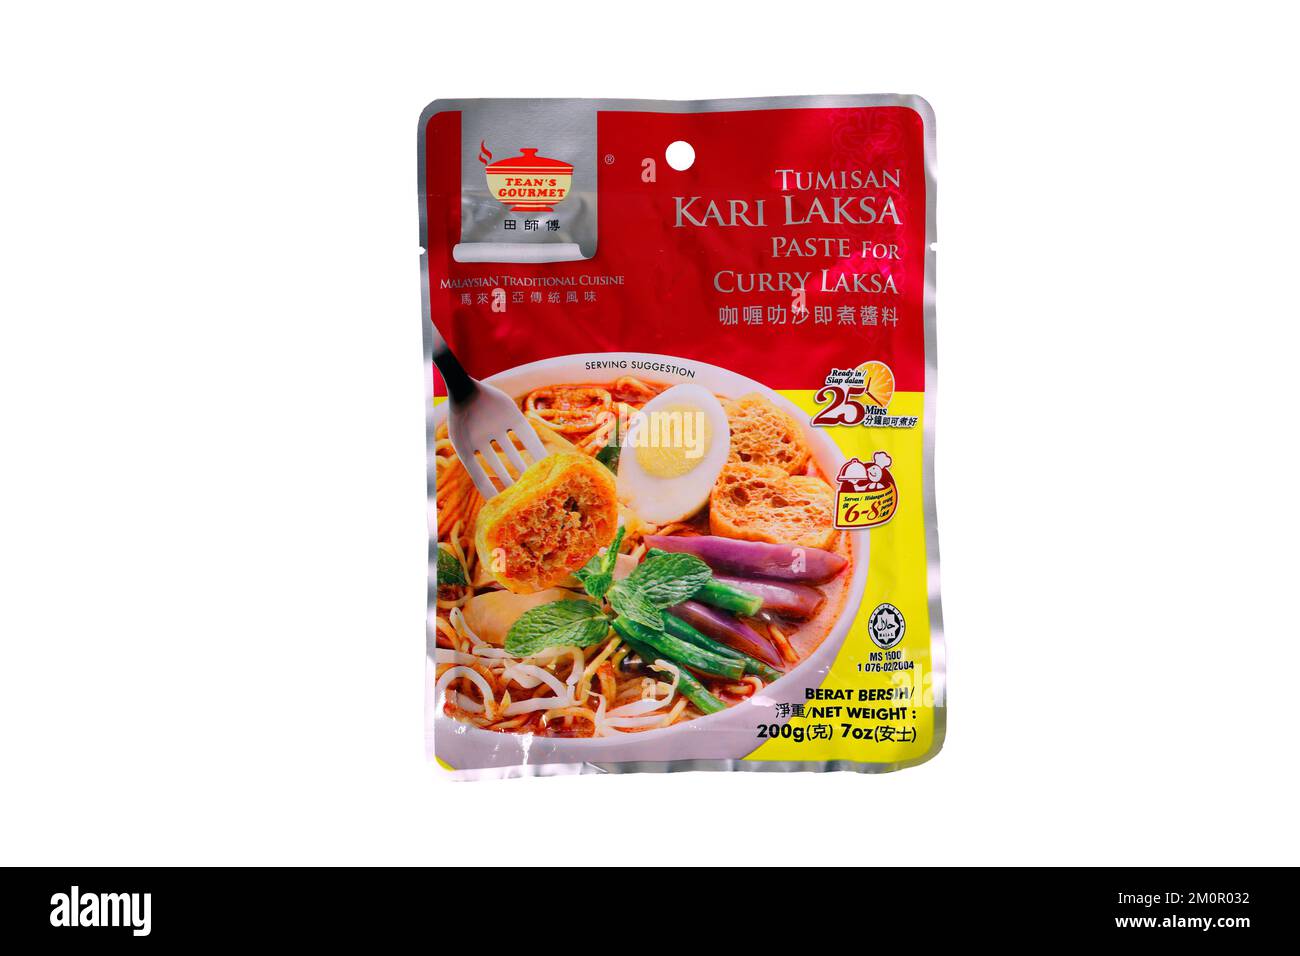 A packet of Tean's Gourmet Tumisan Kari Laksa curry laksa paste isolated on a white background. cutout image for illustration and editorial use. Stock Photo